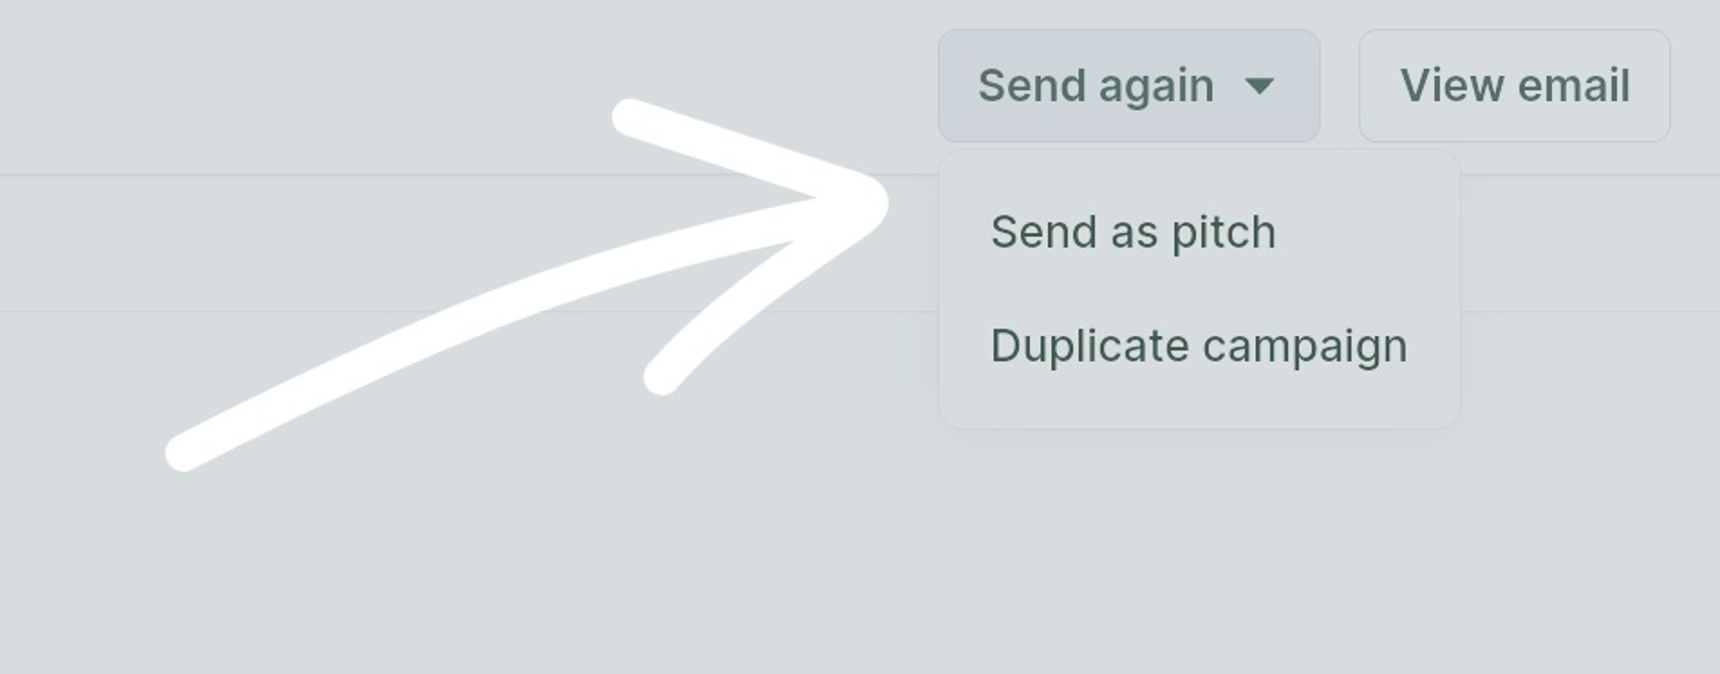 Quickly resend or duplicate campaign